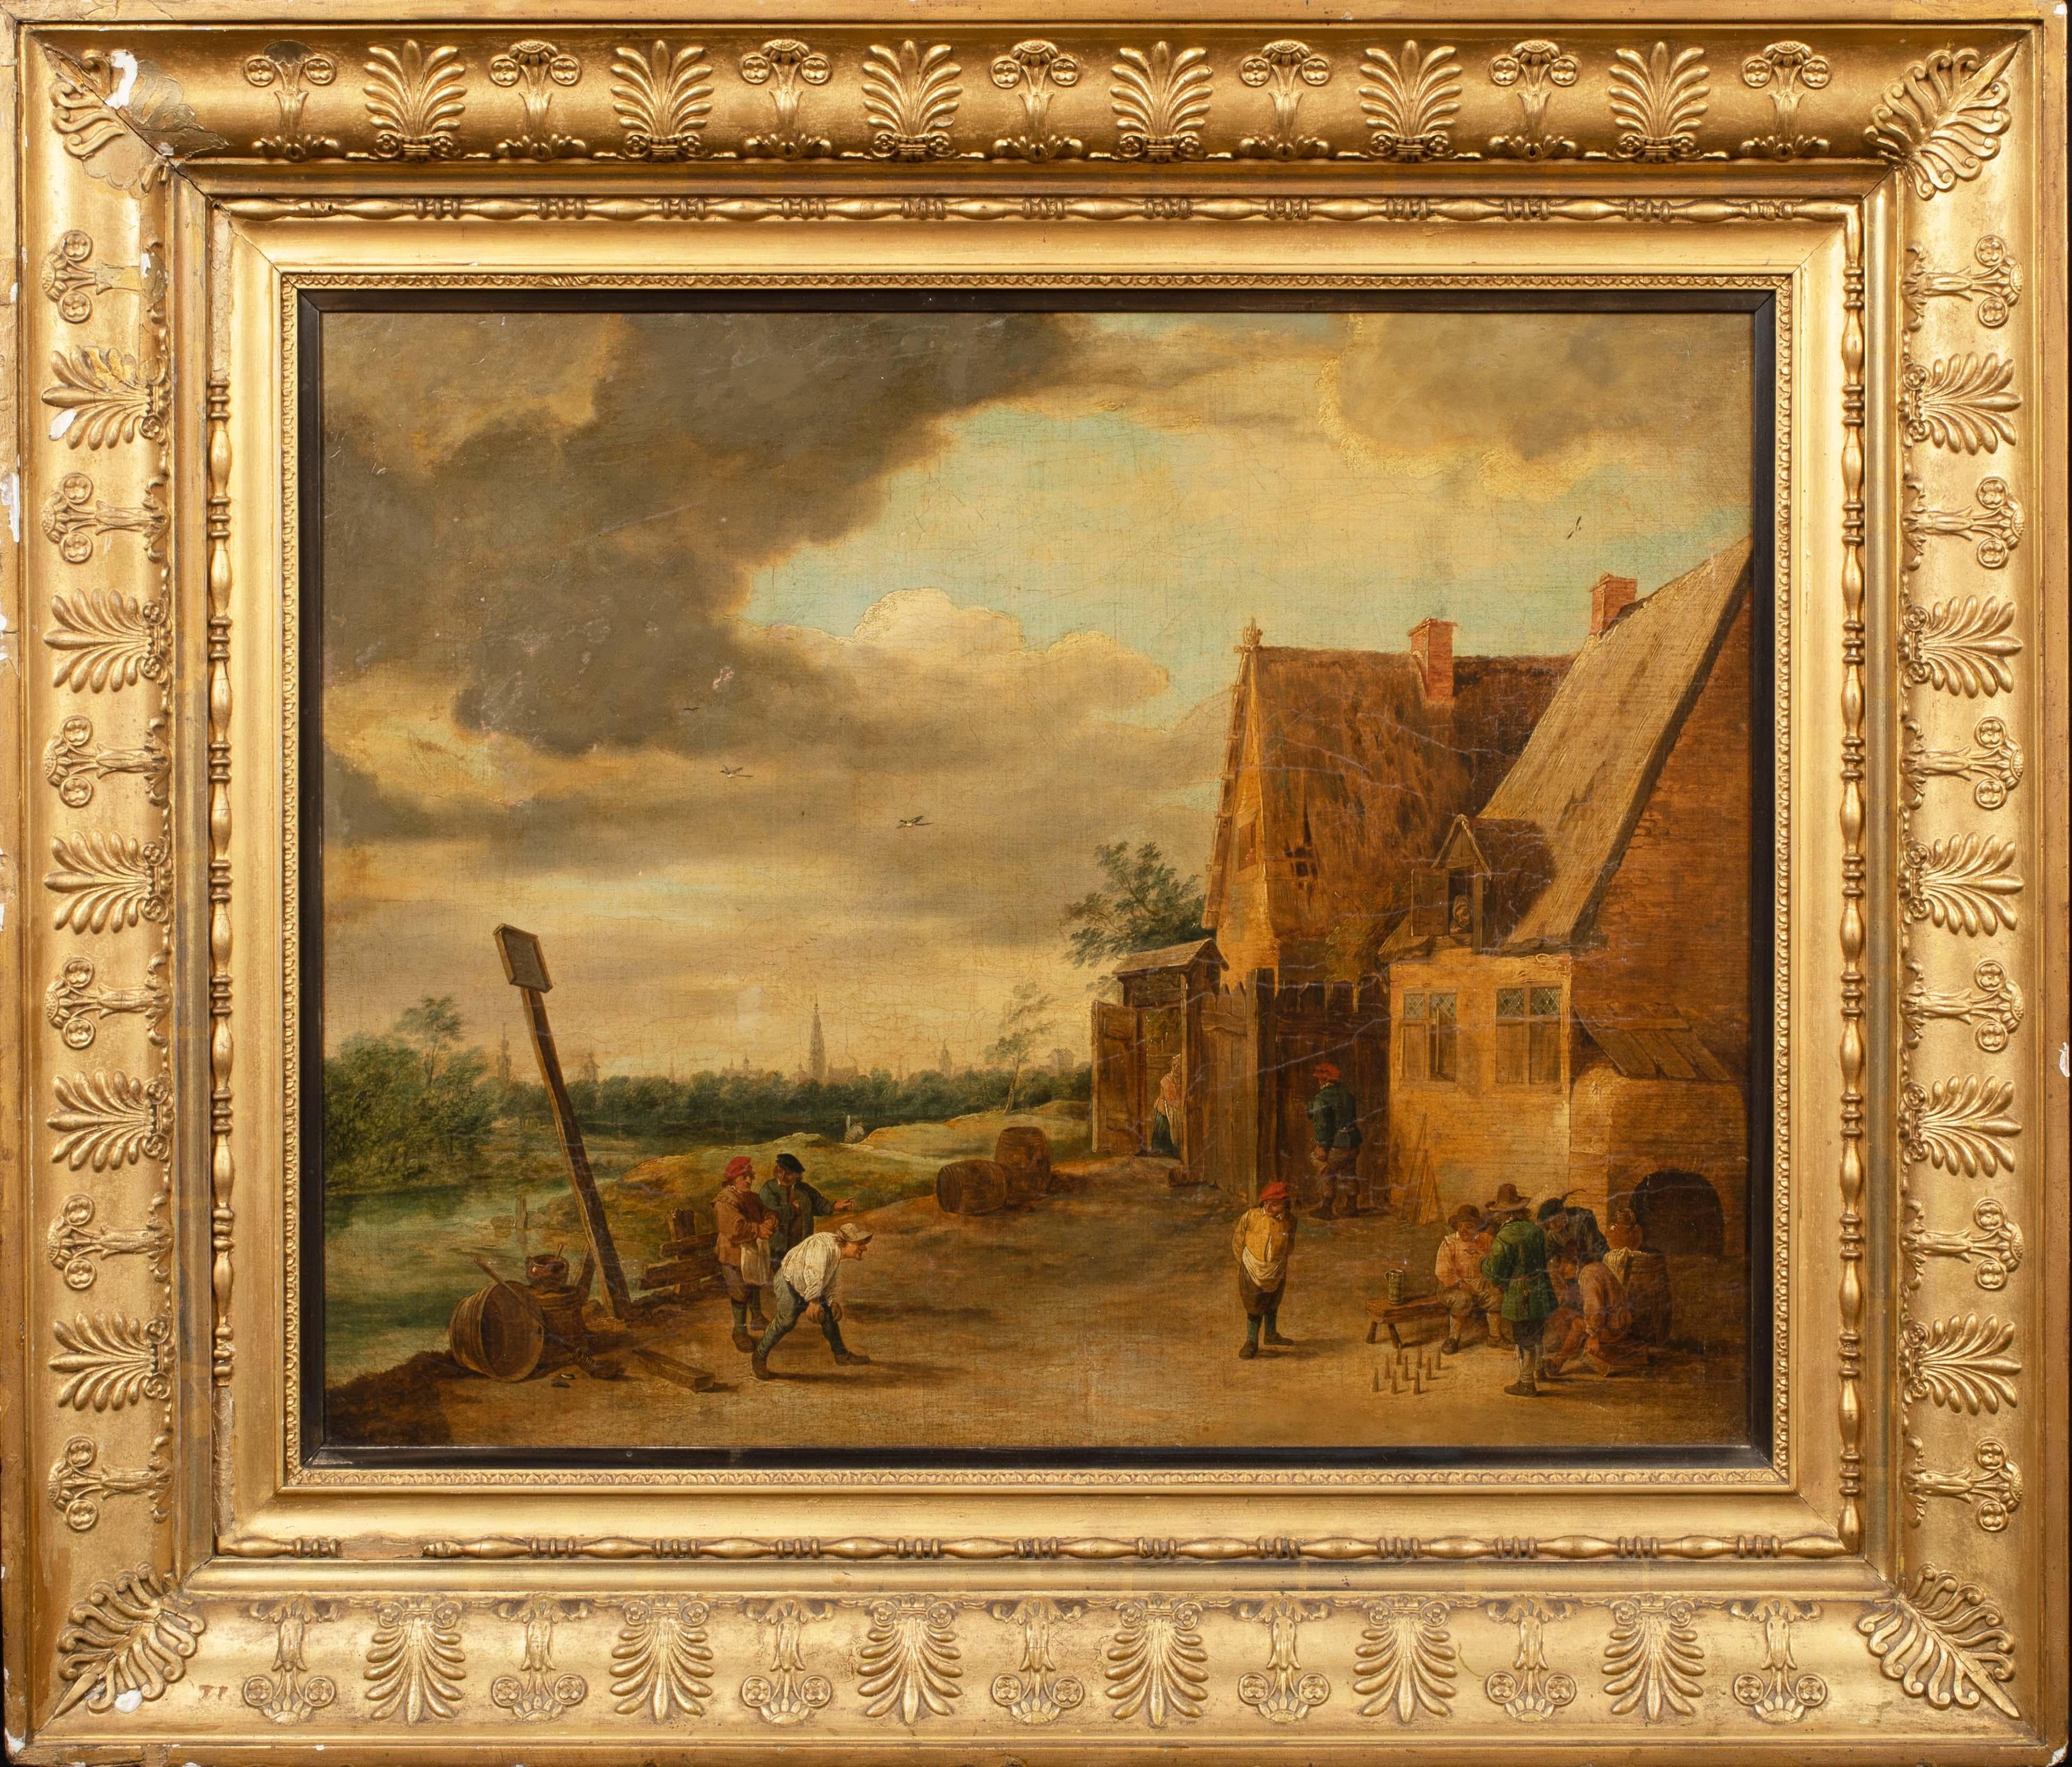 Peasants Bowling Outside A Tavern, Antwerp, 17th Century  - Painting by David Teniers the Younger